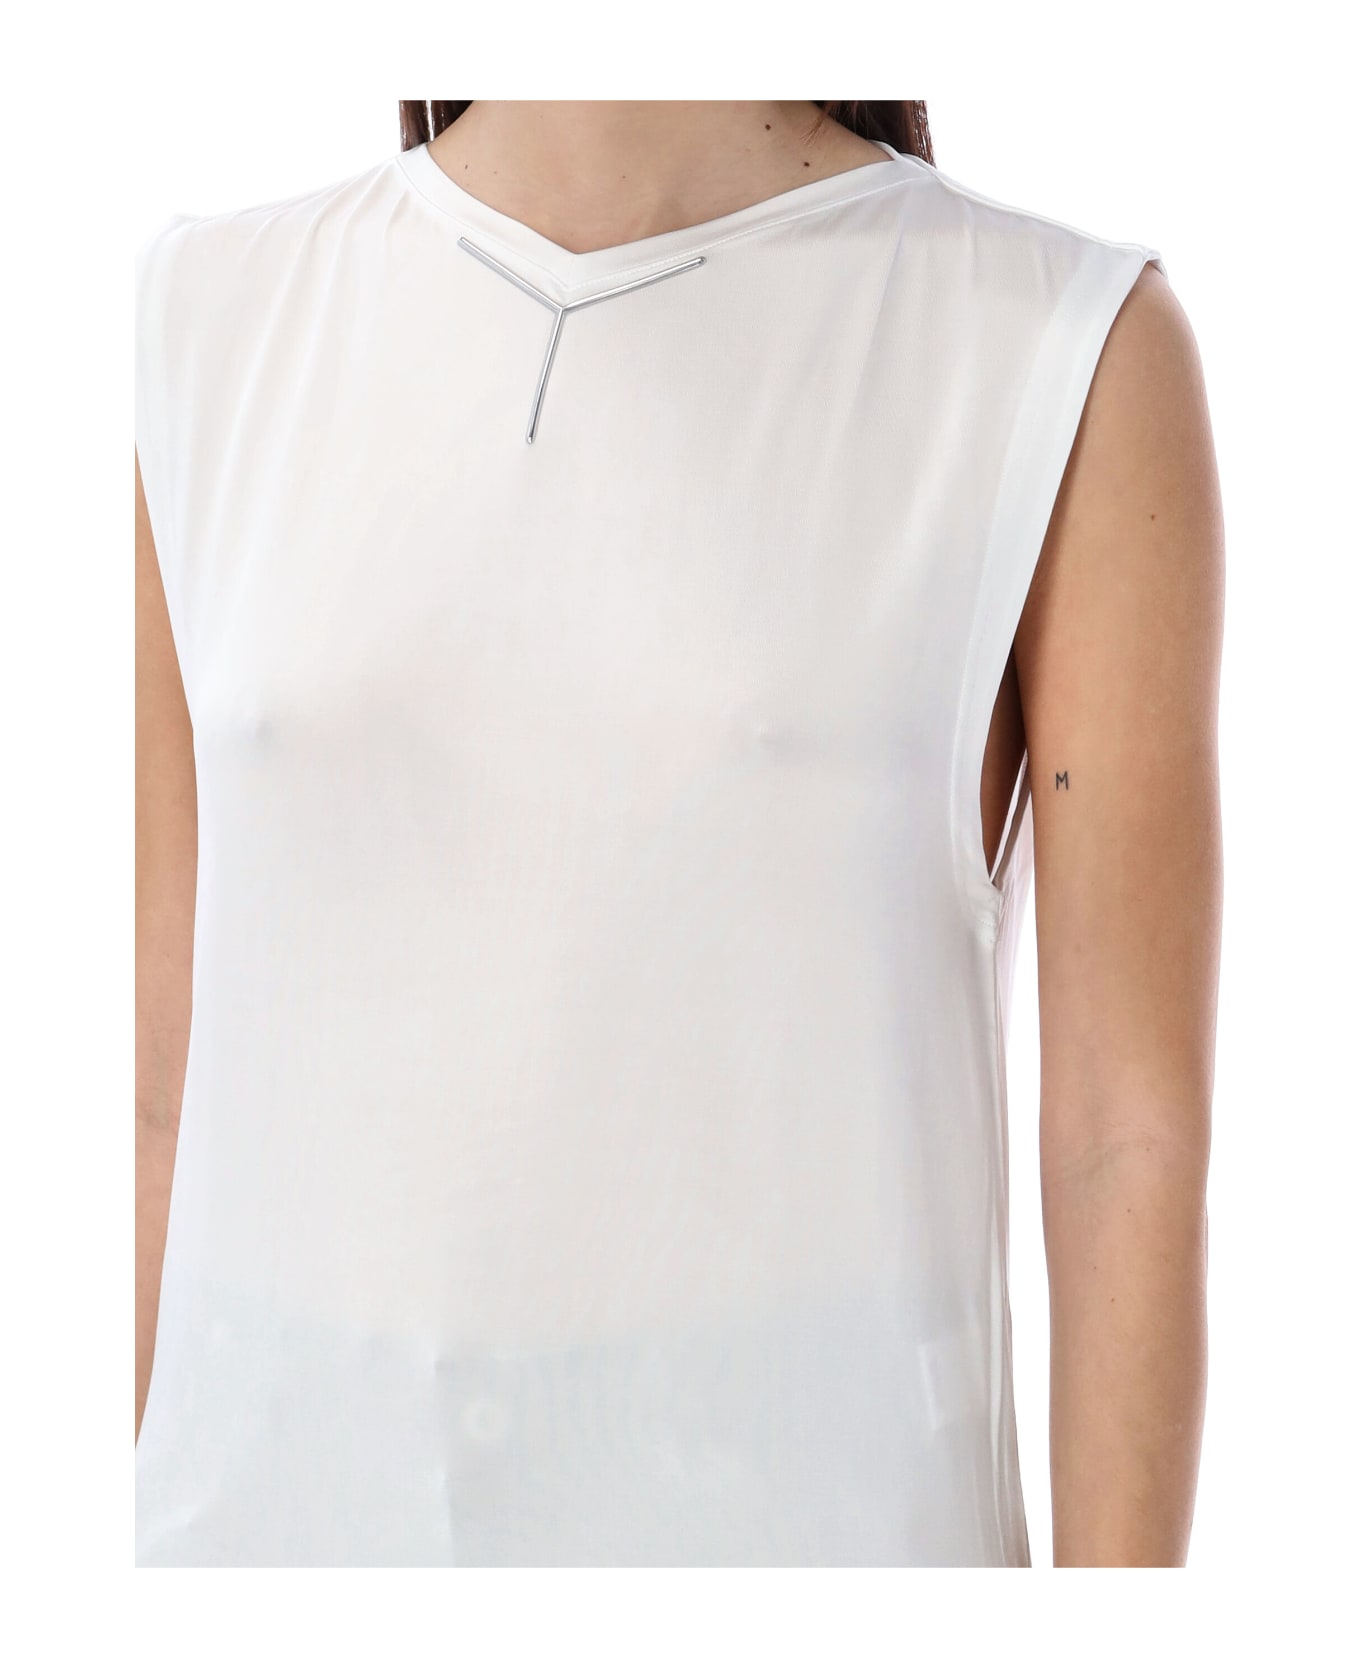 Y/Project T Chrome Tank Top - WHITE